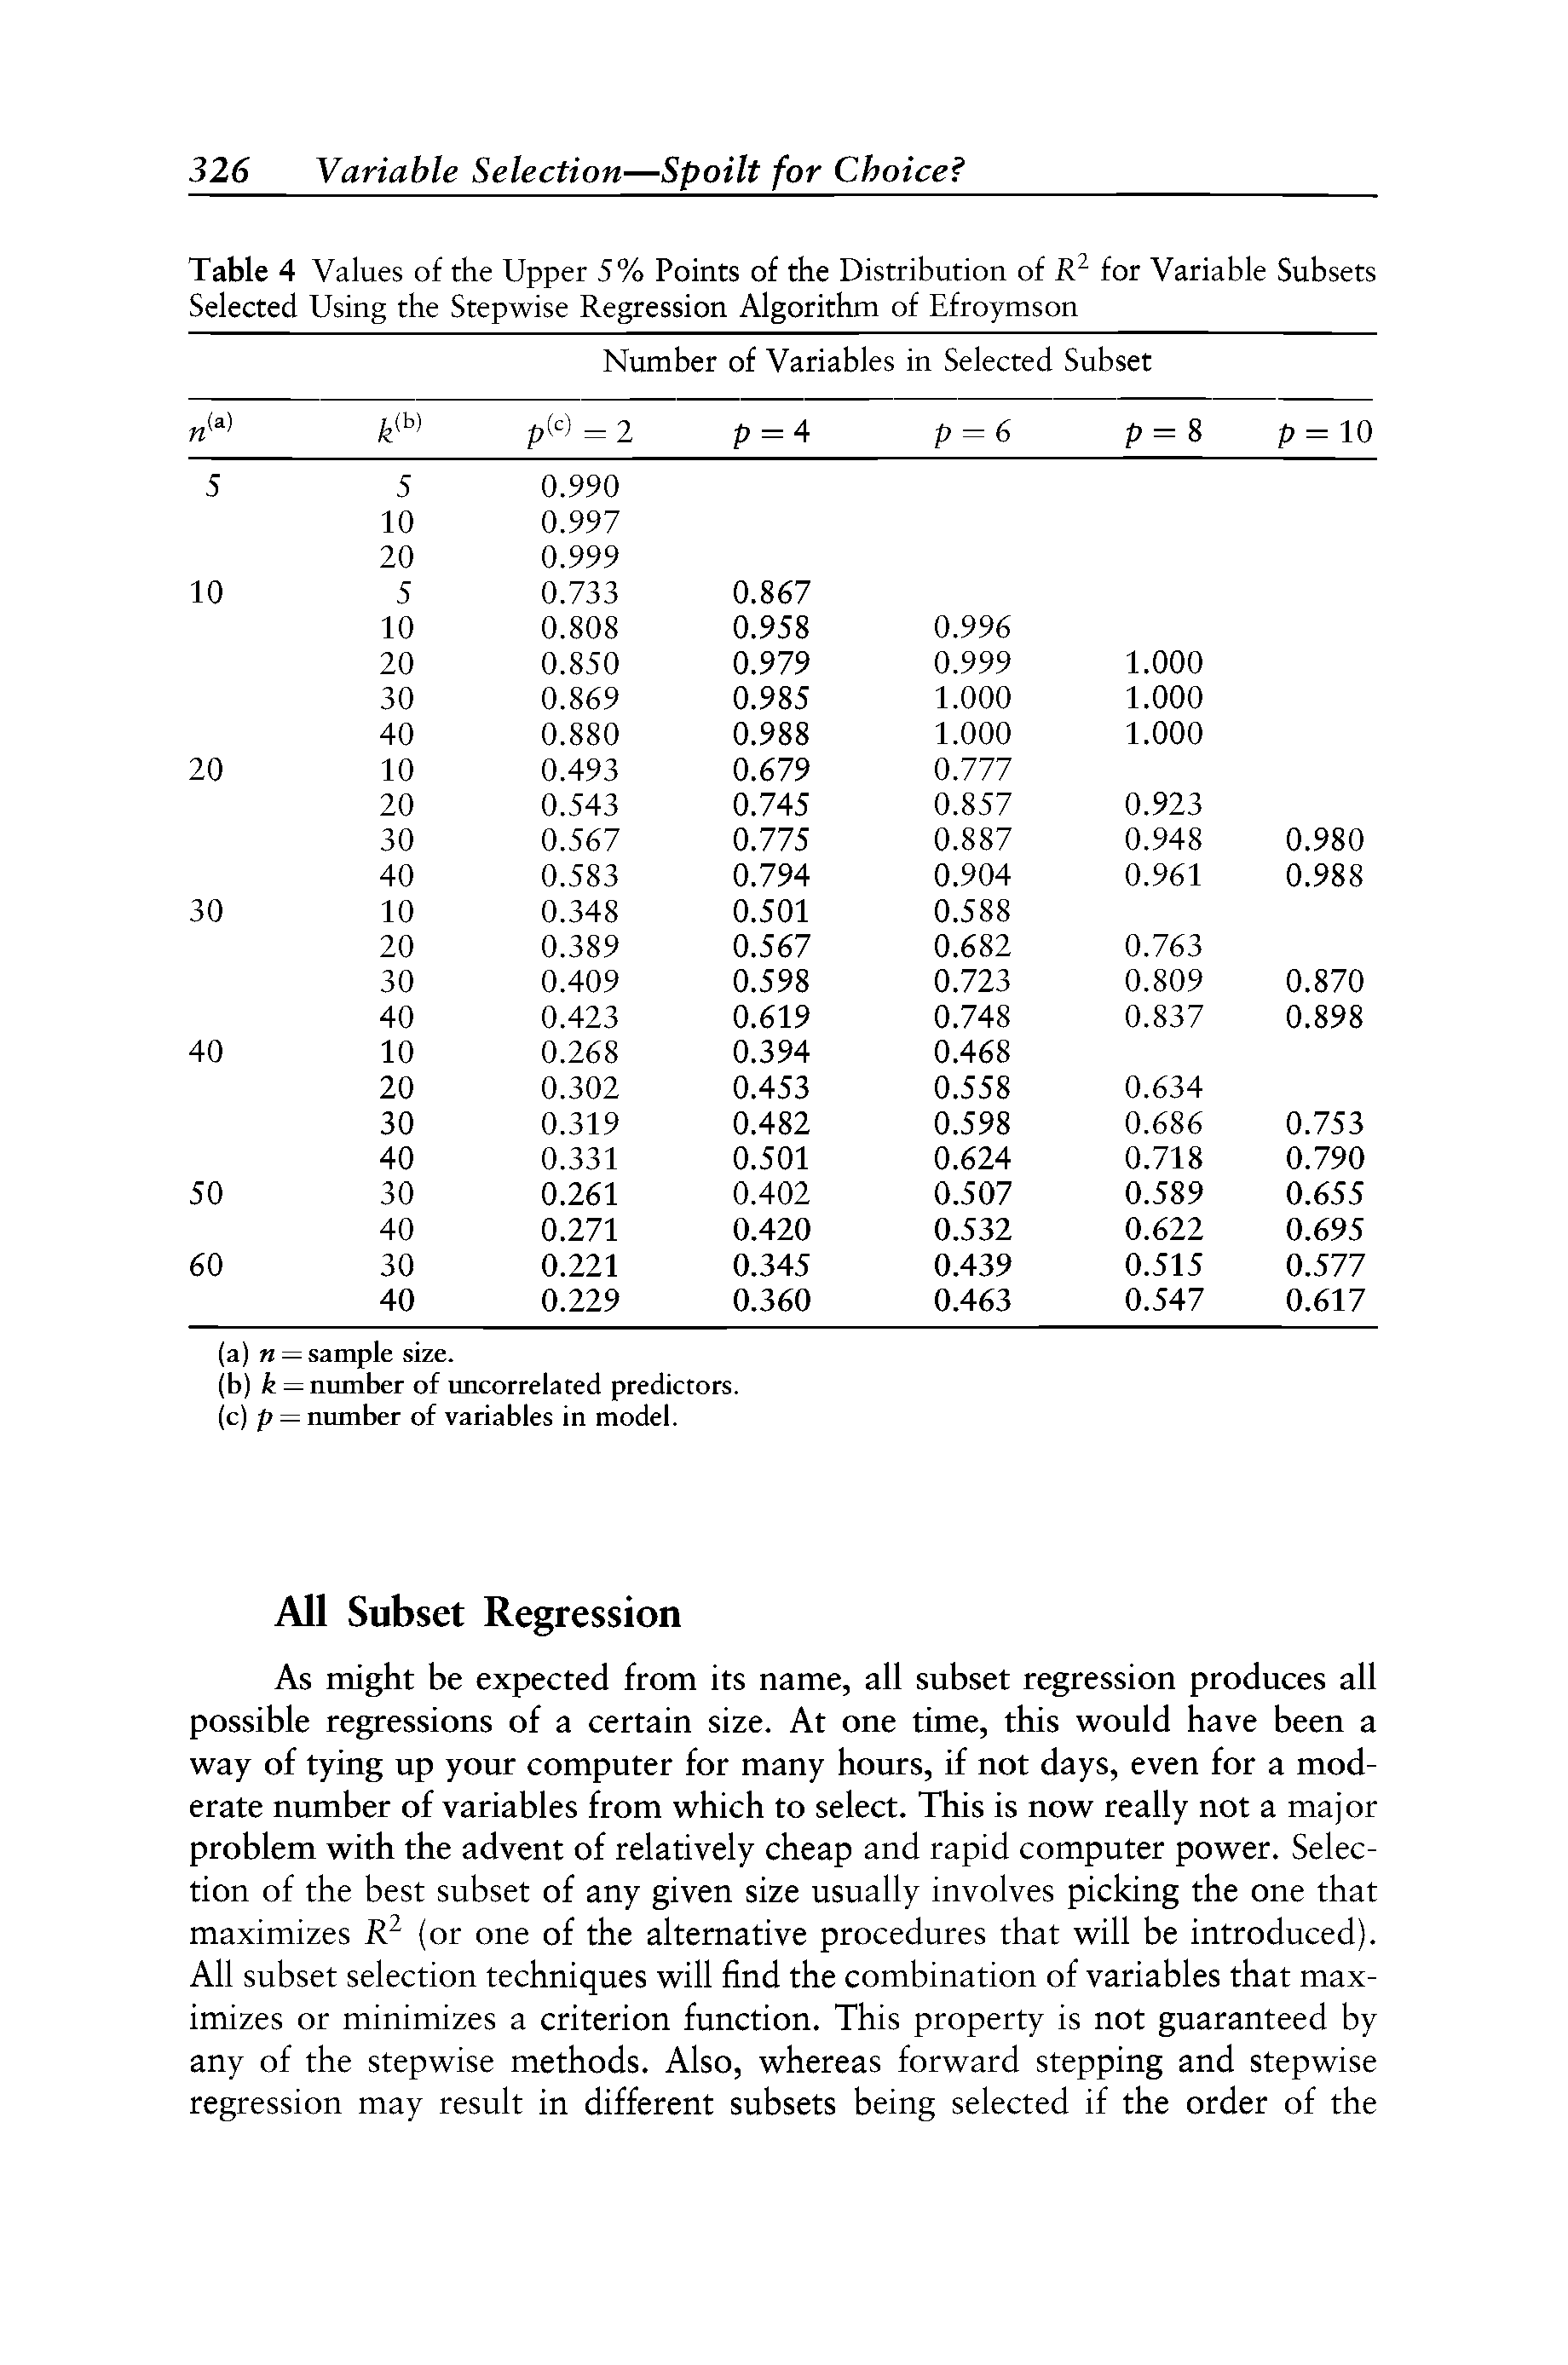 Table 4 Values of the Upper 5% Points of the Distribution of for Variable Subsets Selected Using the Stepwise Regression Algorithm of Efroymson ...